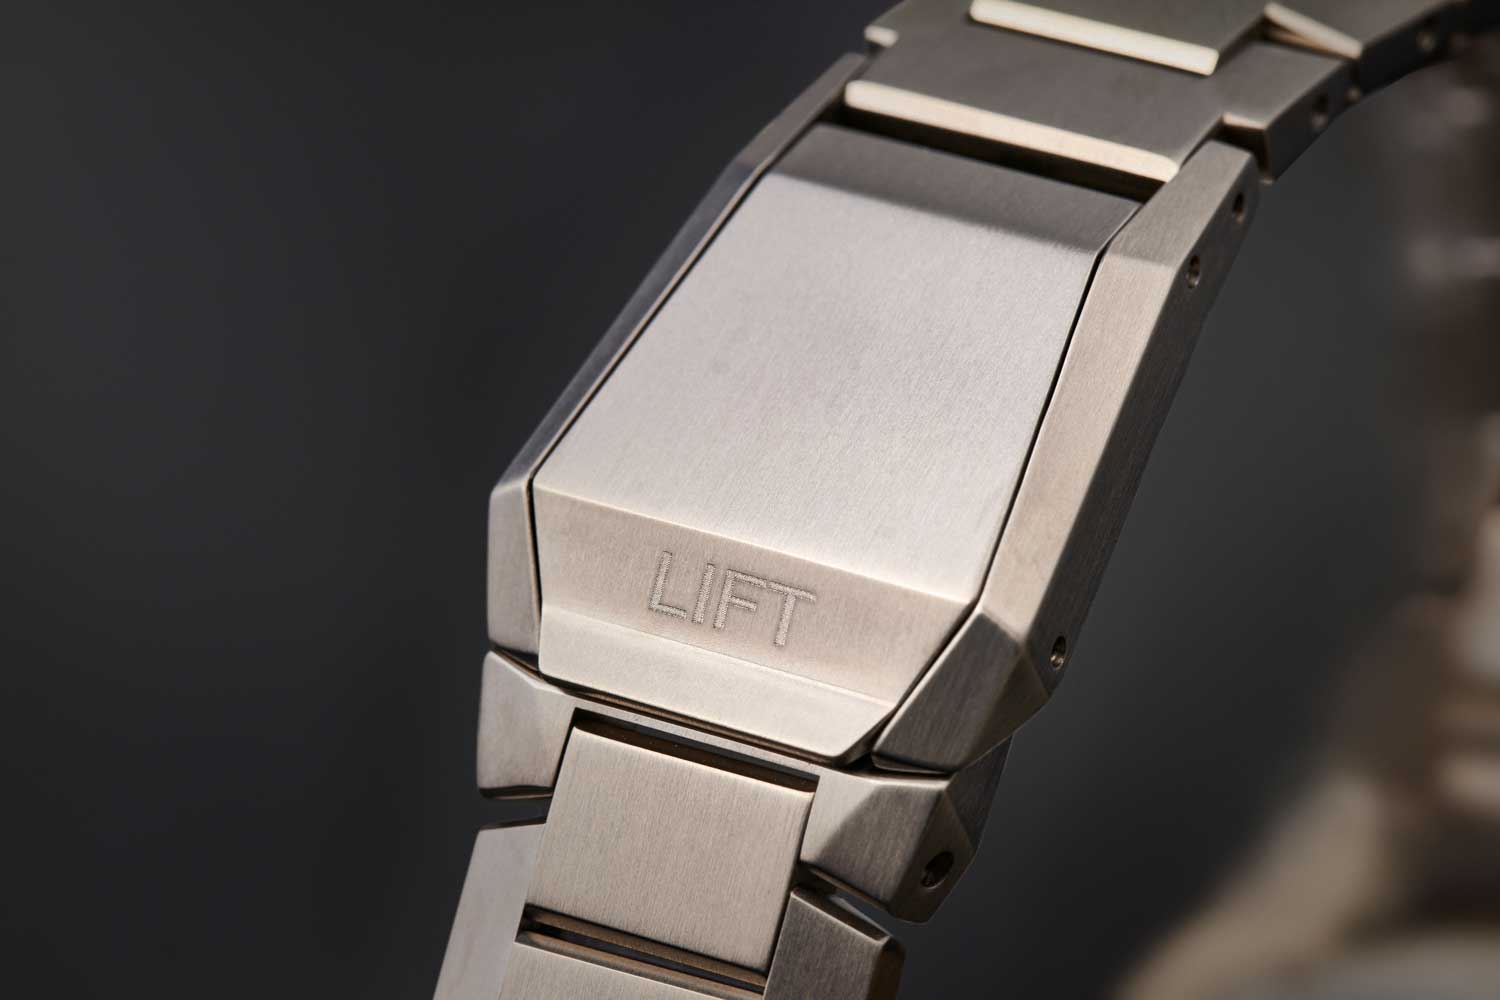 The innovative, patterned 'lift' system clasp keeps the watch securely attached (Image: Revolution©)